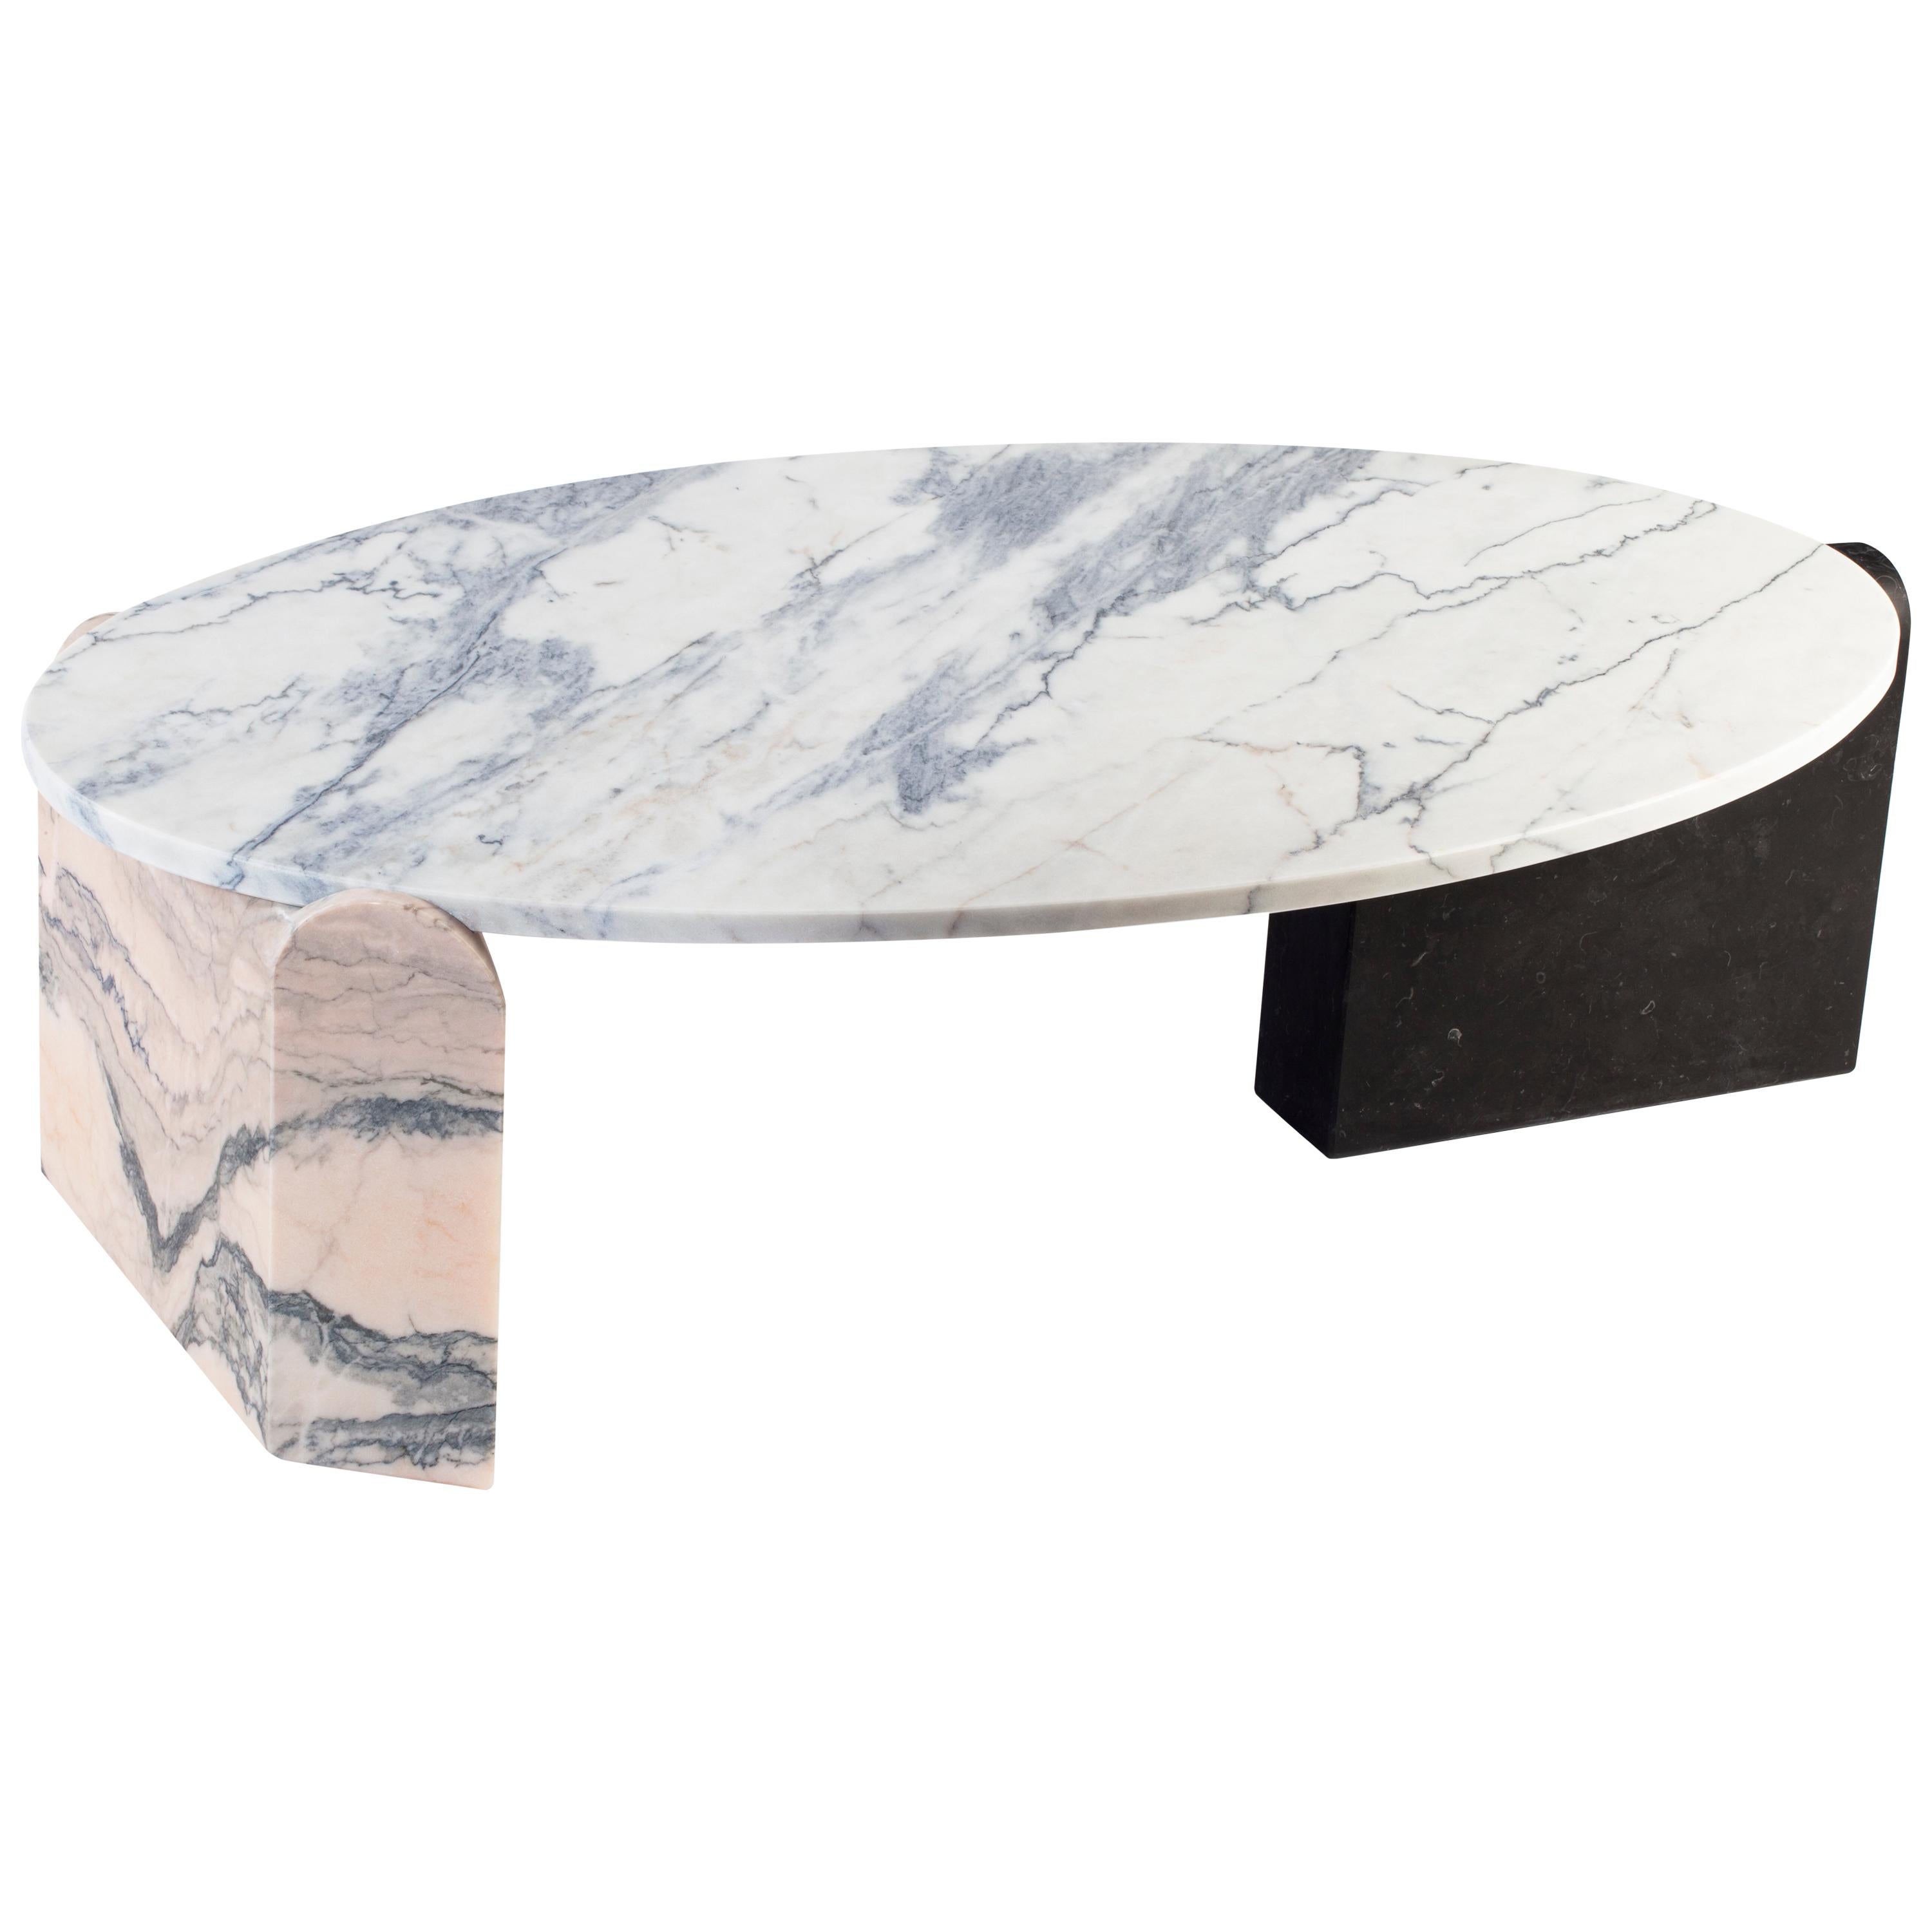 Organic Modern Center Table Jean in Natural Marble Stone Off-white, Black, Pink